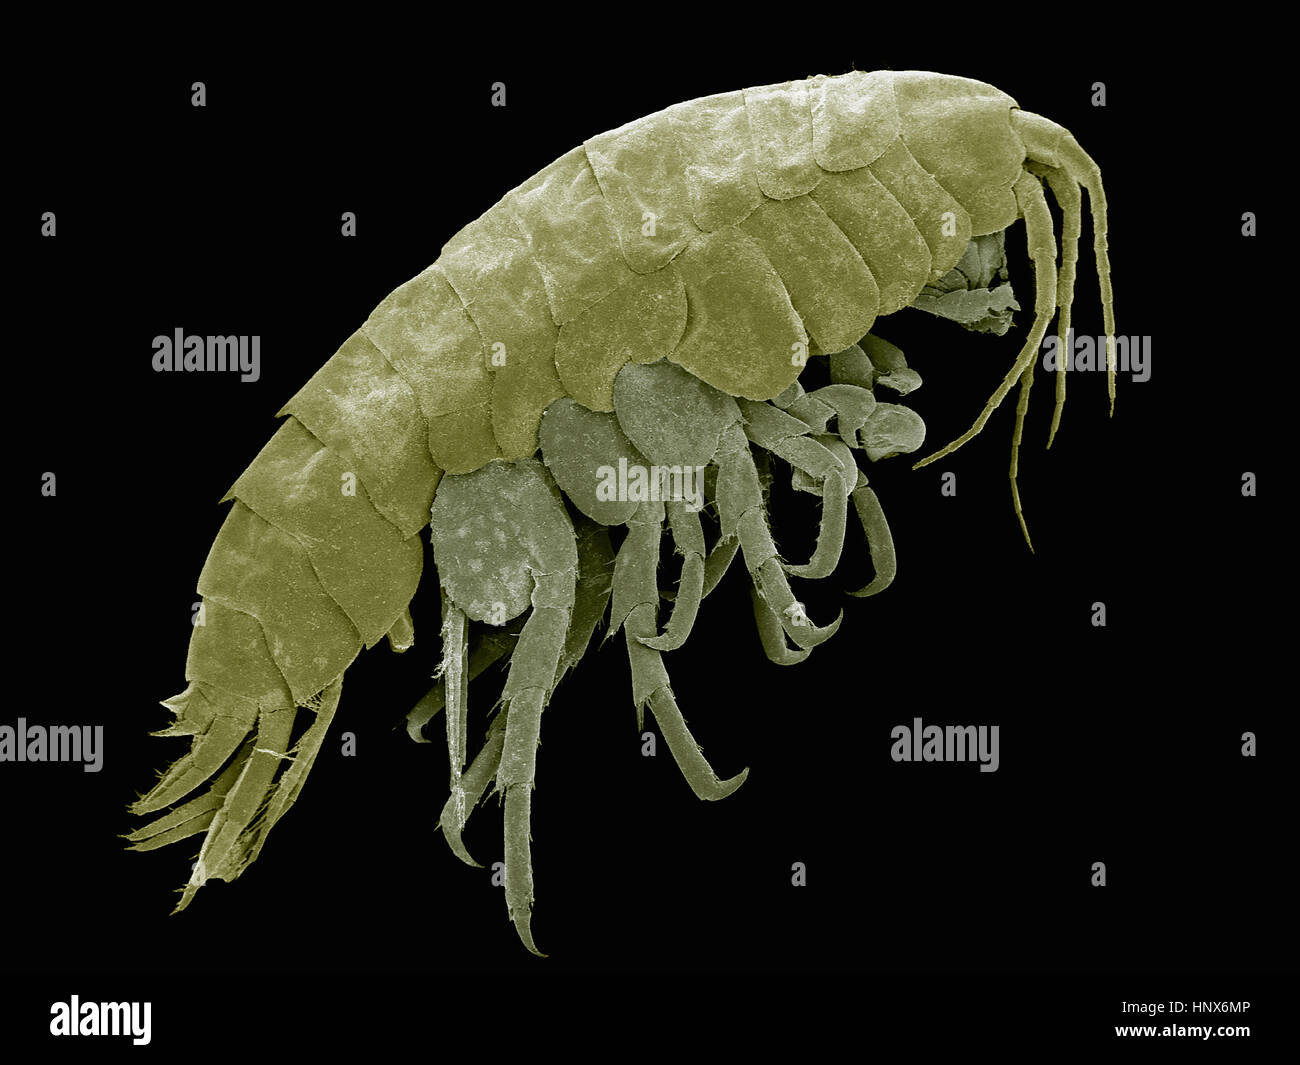 Scanning electron micrograph of a freshwater amphipod (Hyalella sp) Stock Photo